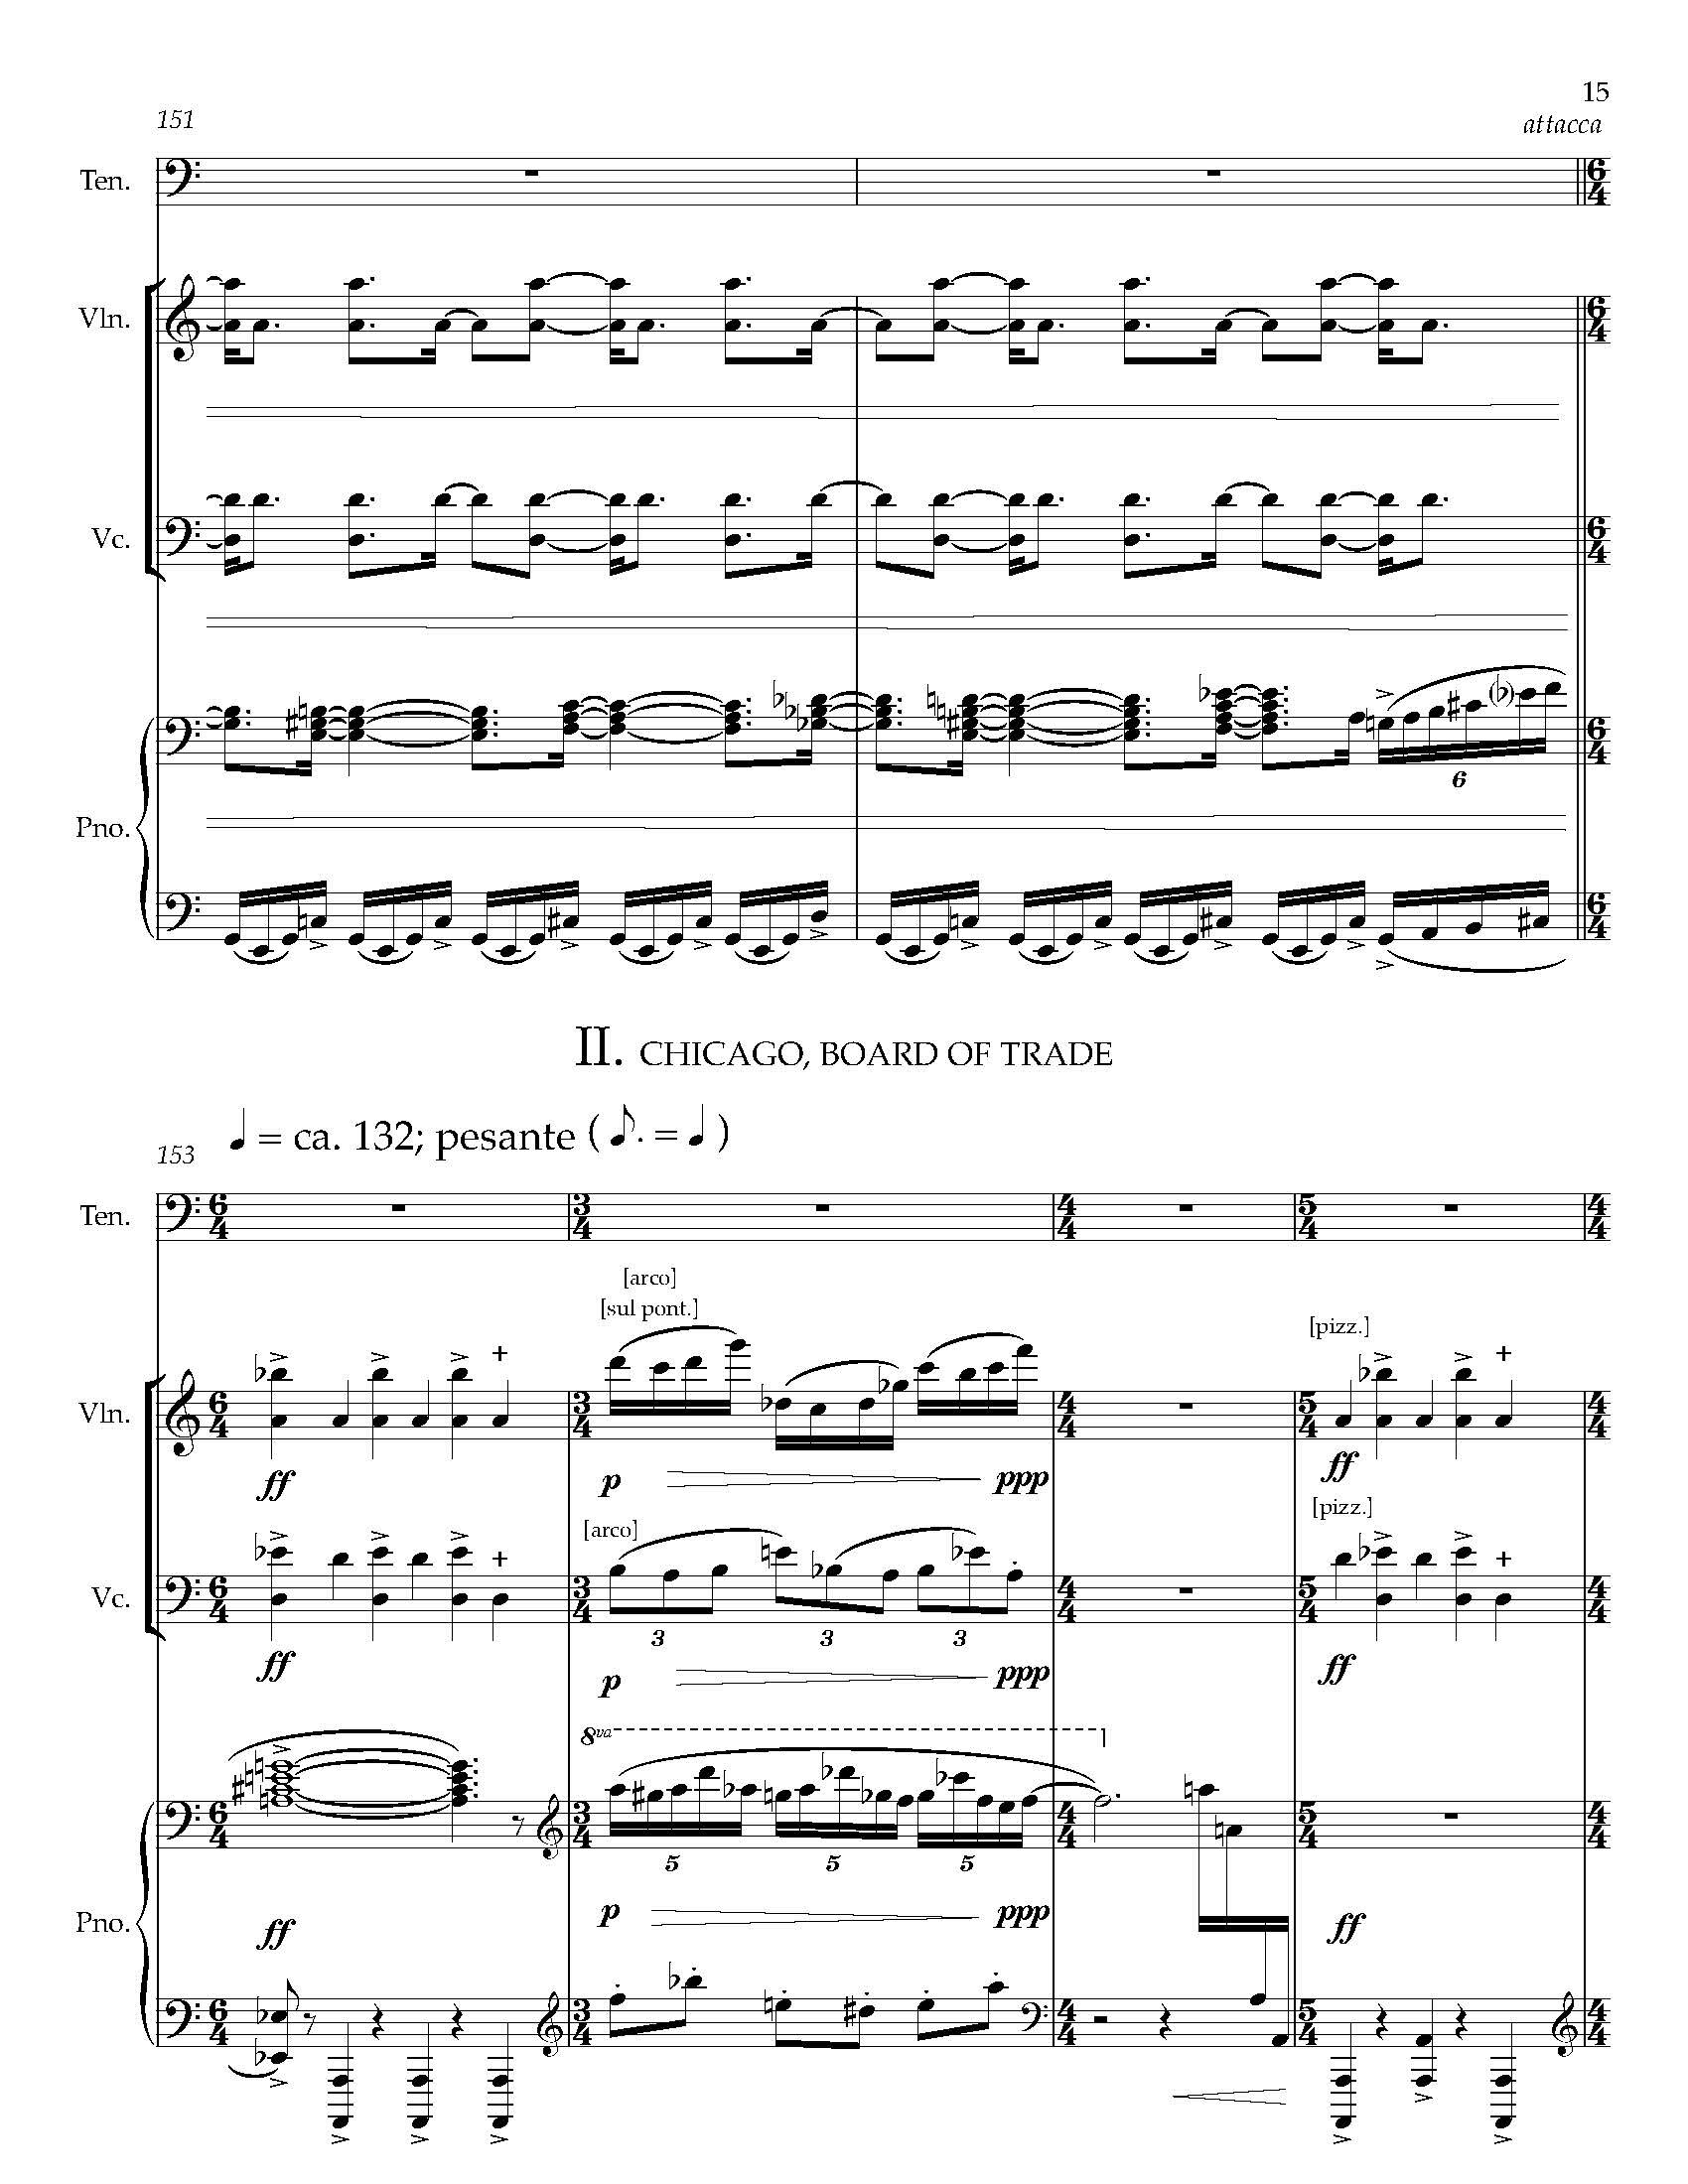 Gursky Songs - Complete Score_Page_23.jpg